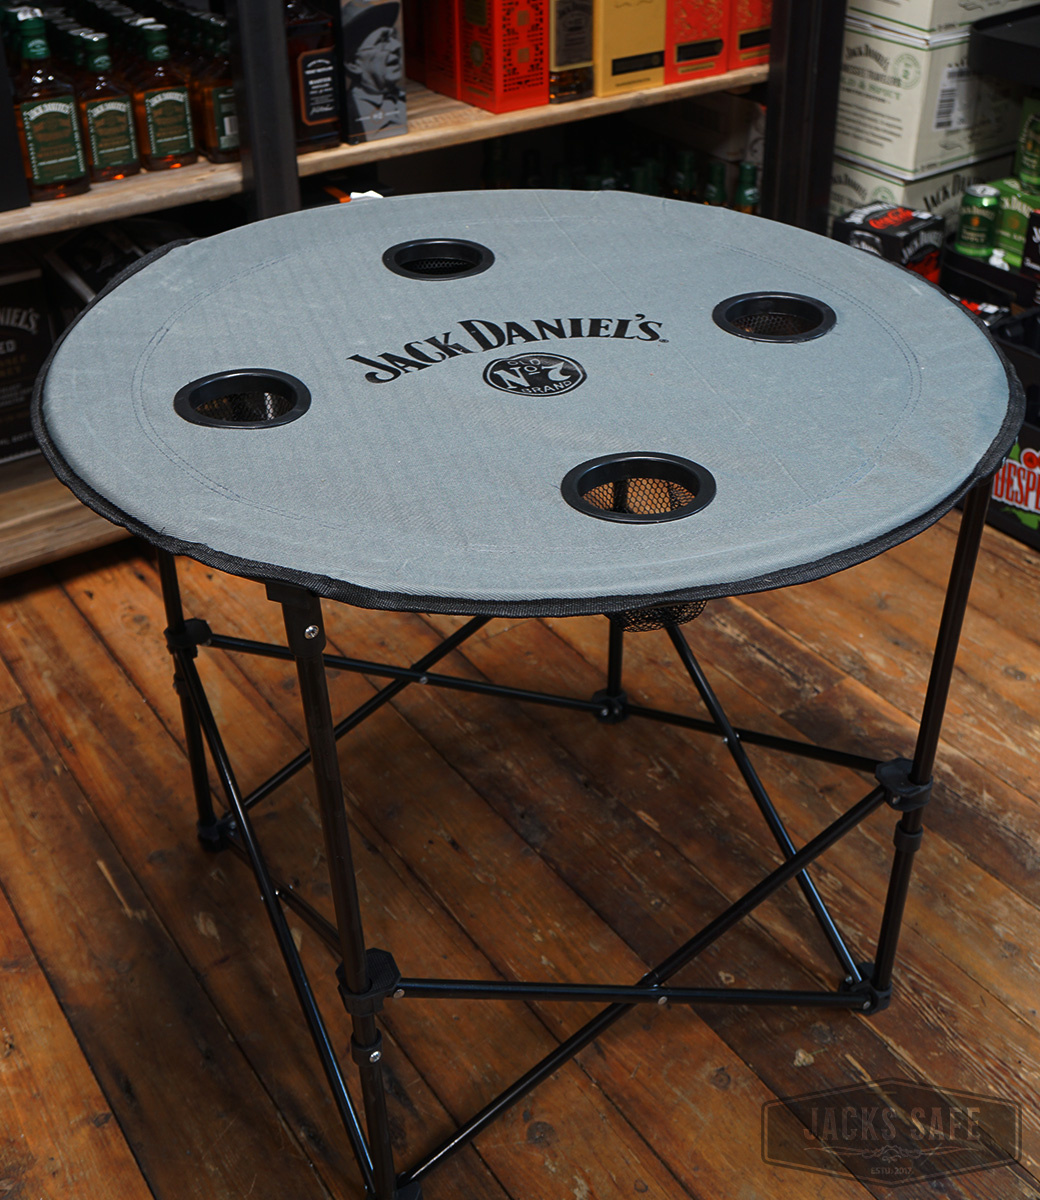 JACK DANIEL'S - PROMO ITEMS - QUALITY FOLDING TABLE IN CARRIER BAG - NEW